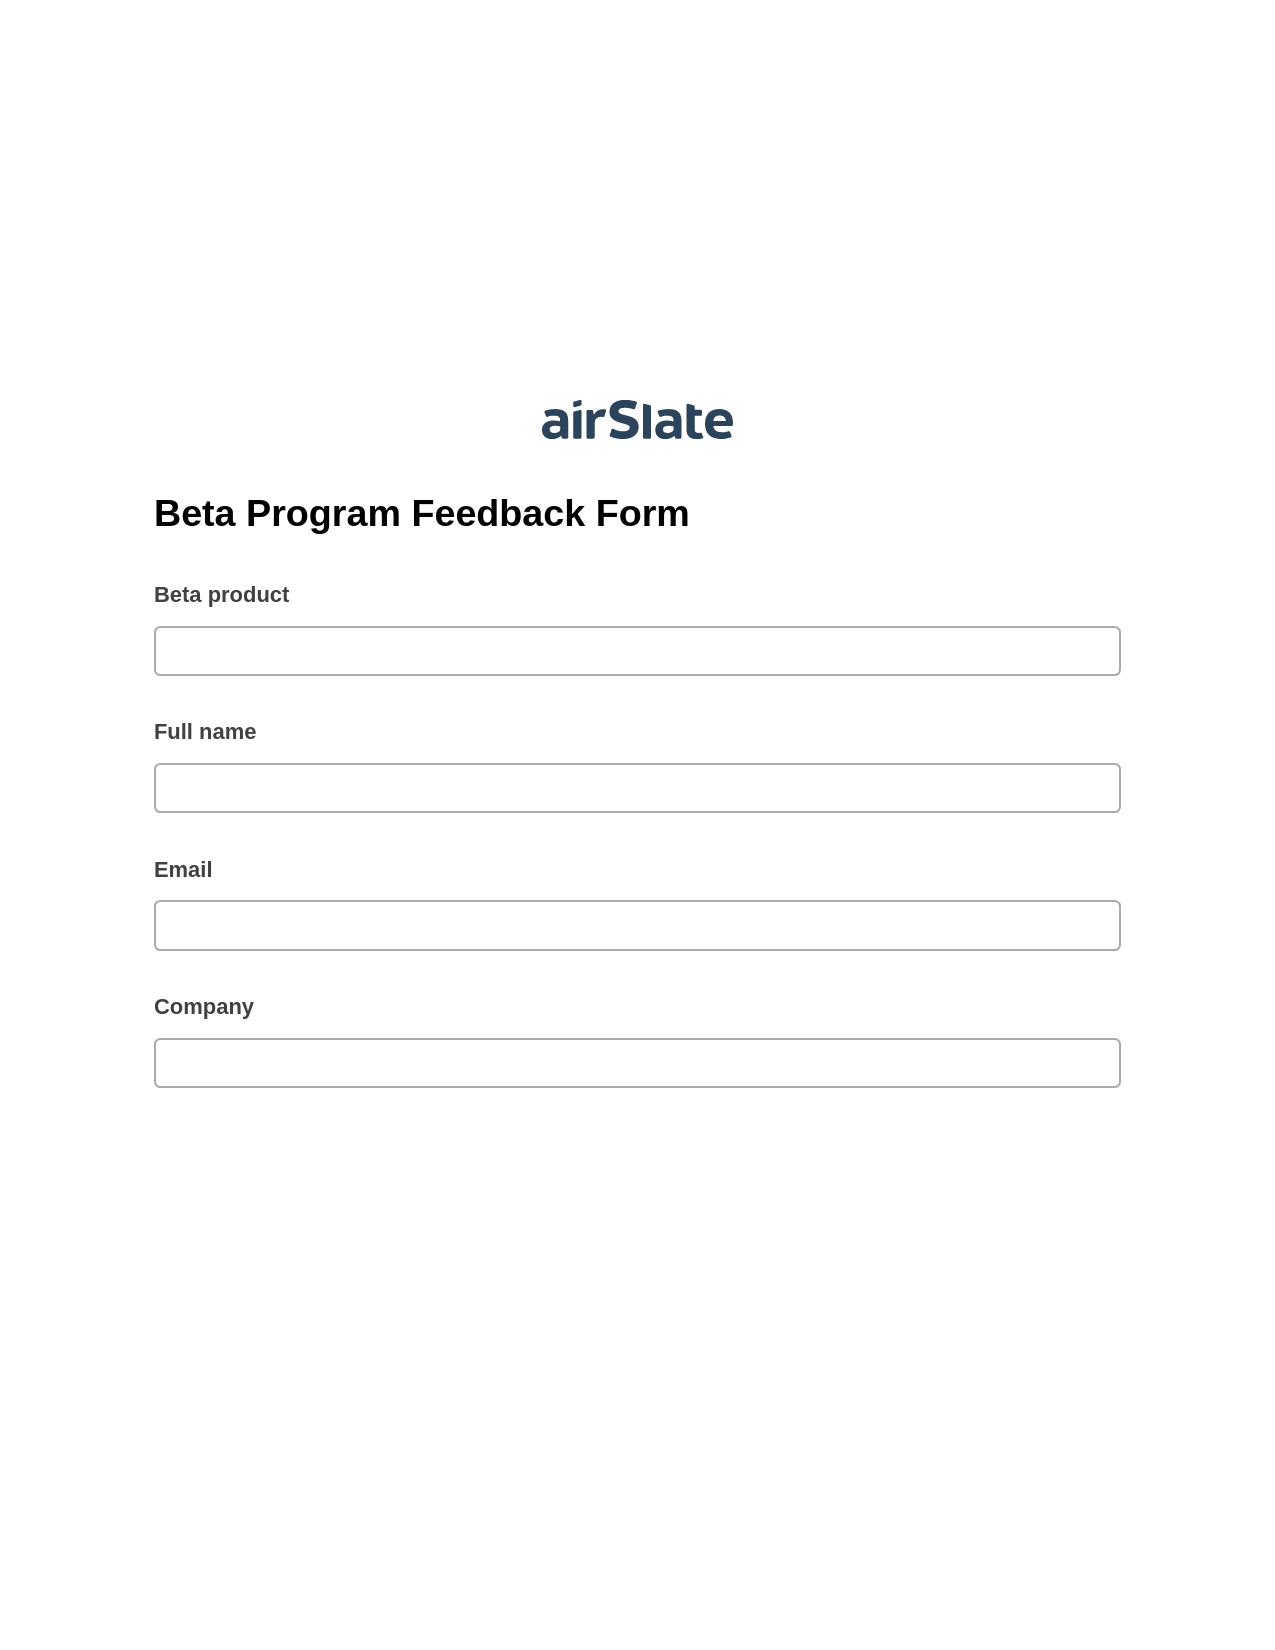 Beta Program Feedback Form Pre-fill from Salesforce Records with SOQL Bot, Update Salesforce Record Bot, Post-finish Document Bot